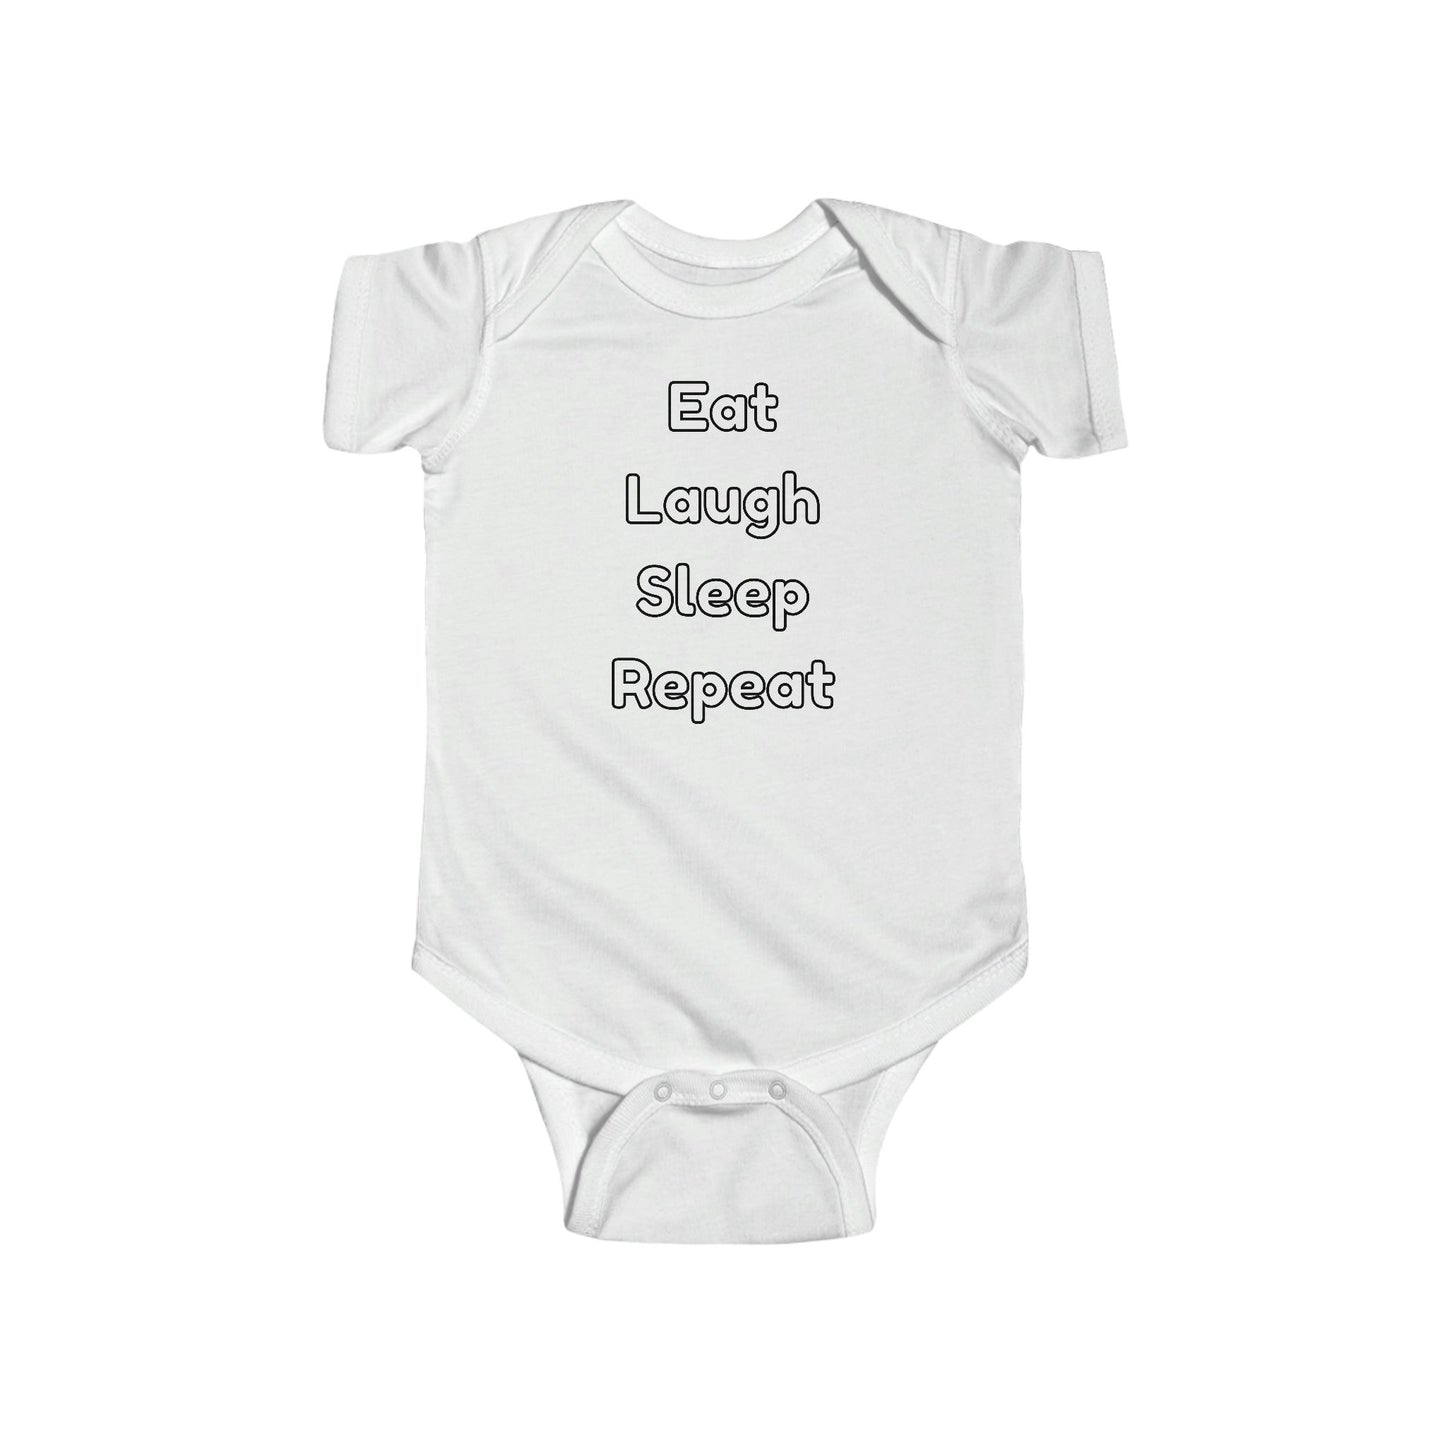 Baby Onesies, Baby gifts, Bodysuit, Baby clothes, Eat laugh sleep repeat